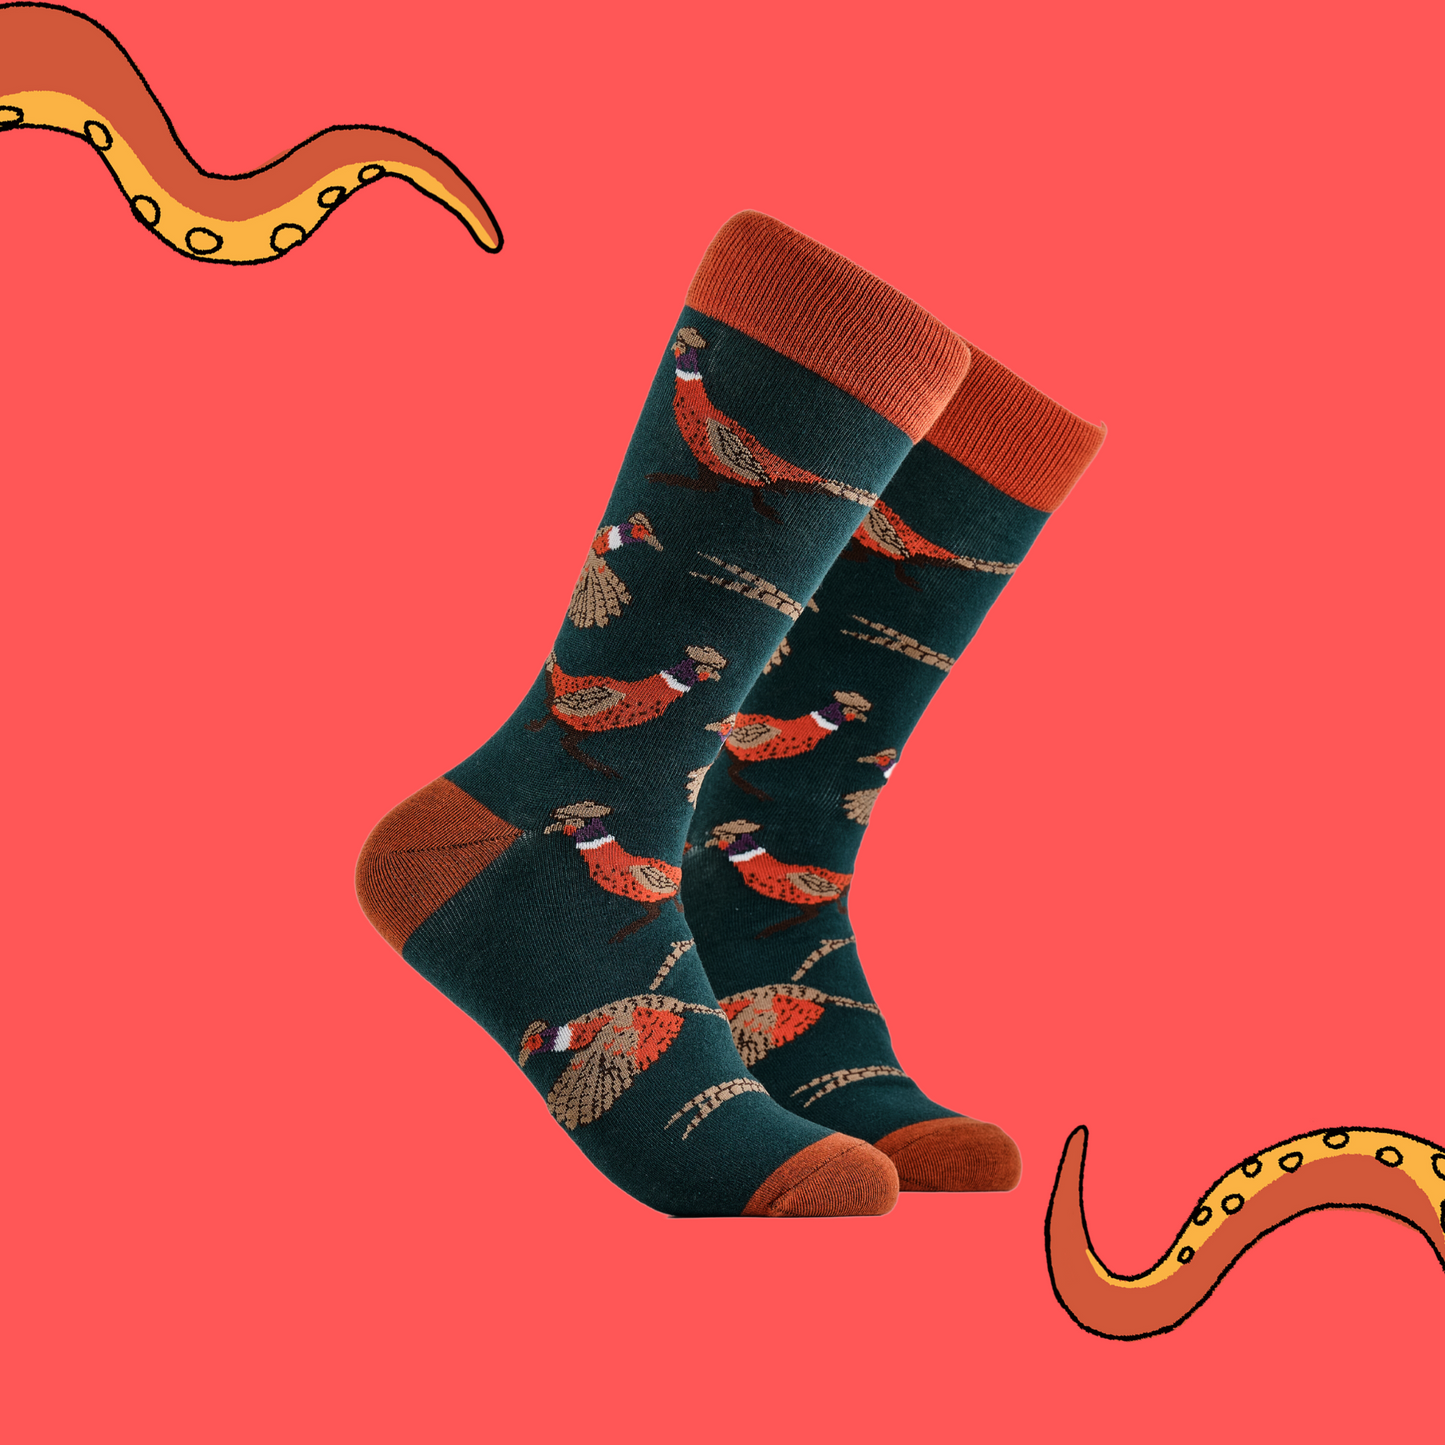 A pair of socks depicting wild pheasants. Green legs, red cuff, heel and toe.